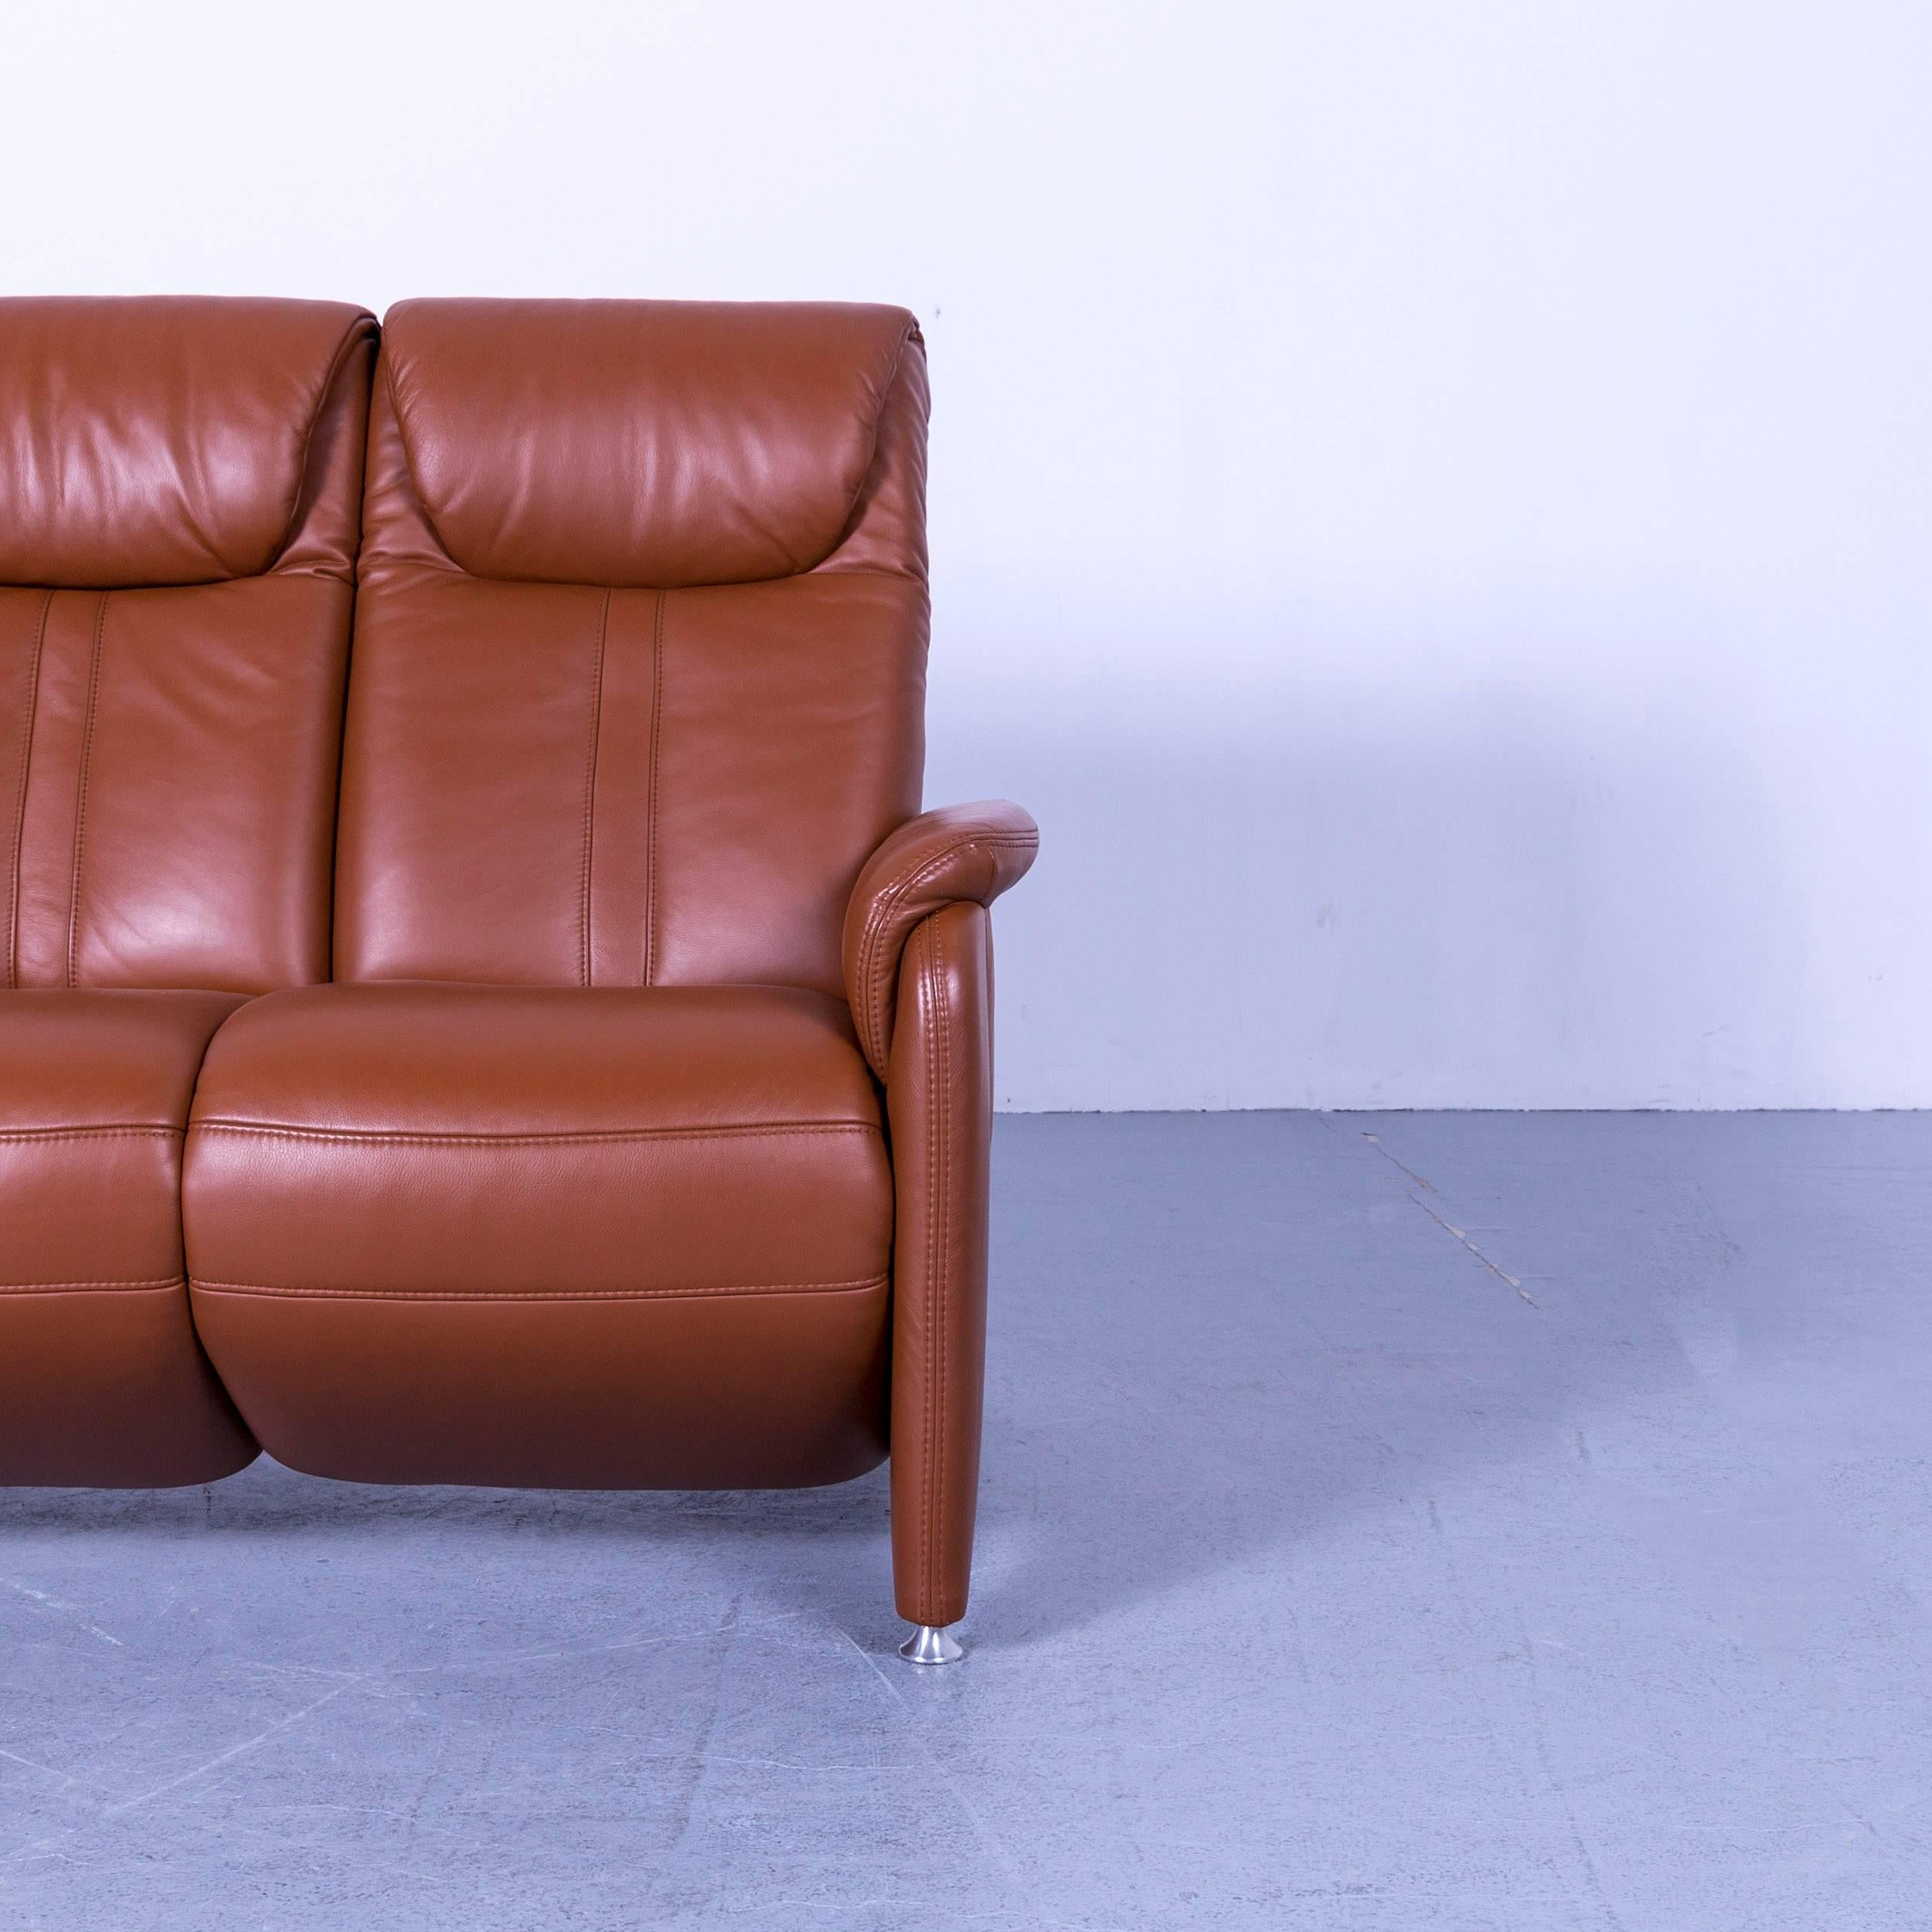 Willy Schillig Designer Leather Sofa Brown Two-Seat Recliner For Sale 5